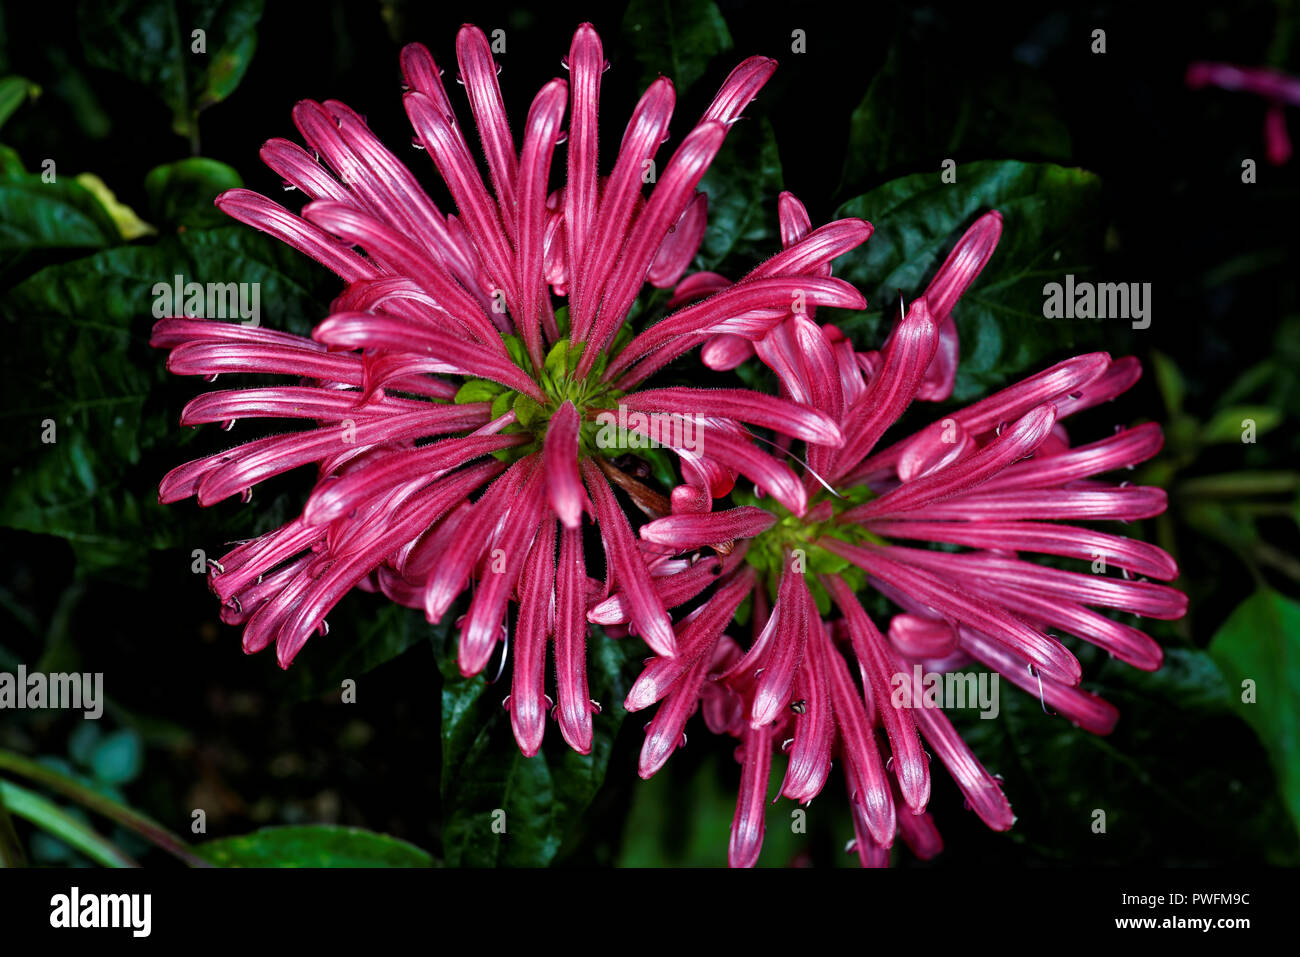 Justicia carnea, with common names including Brazilian plume flower, Brazilian-plume, flamingo flower, and jacobinia — is a flowering plant in the fam Stock Photo